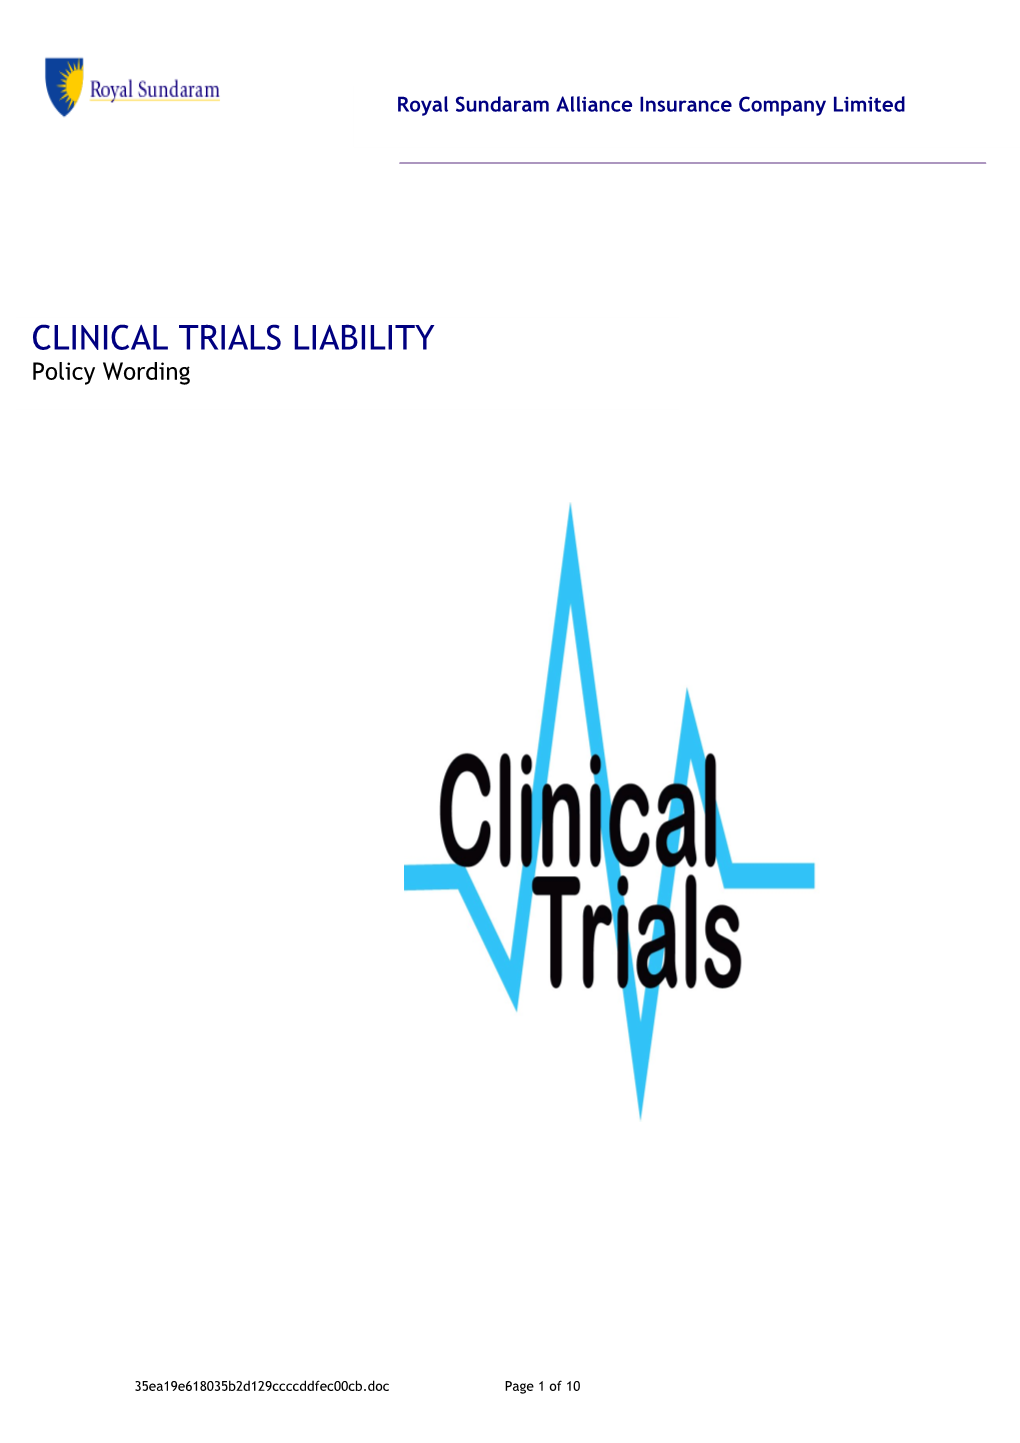 No Fault Compensation Insurance for Clinical Trials